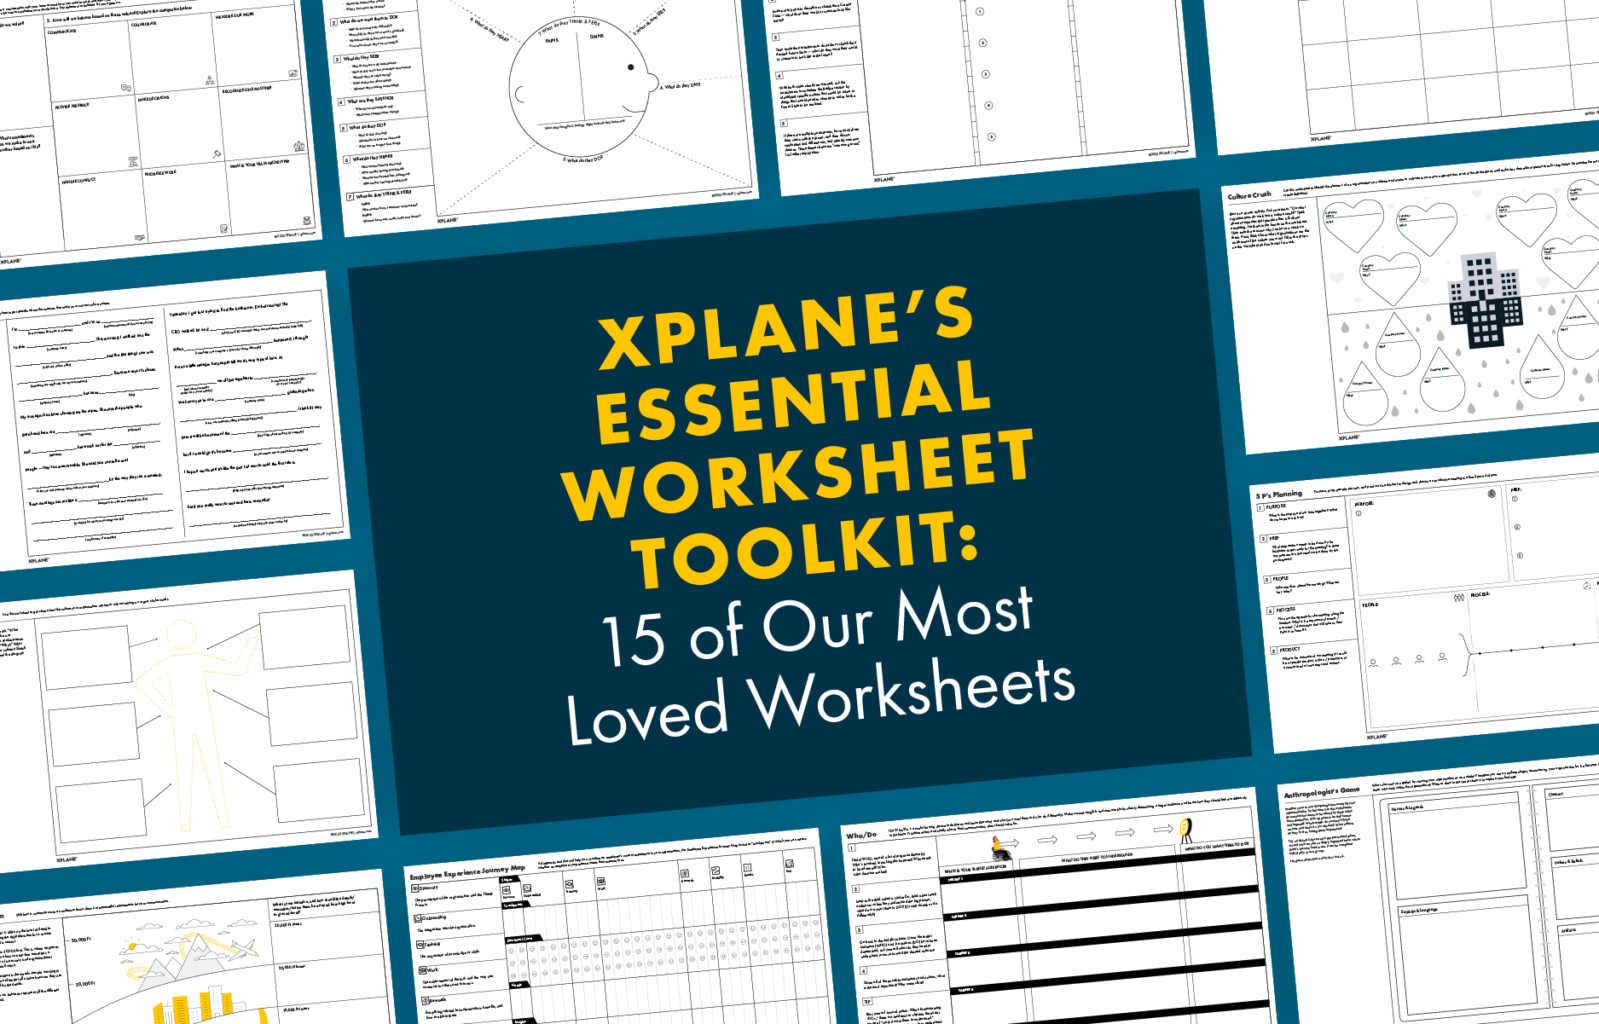 Tiled worksheets against a medium blue background. At the center is a dark blue square with text reading "XPLANE'S ESSENTIAL WORKSHEET TOOLKIT: 15 of Our Most Loved Worksheets".